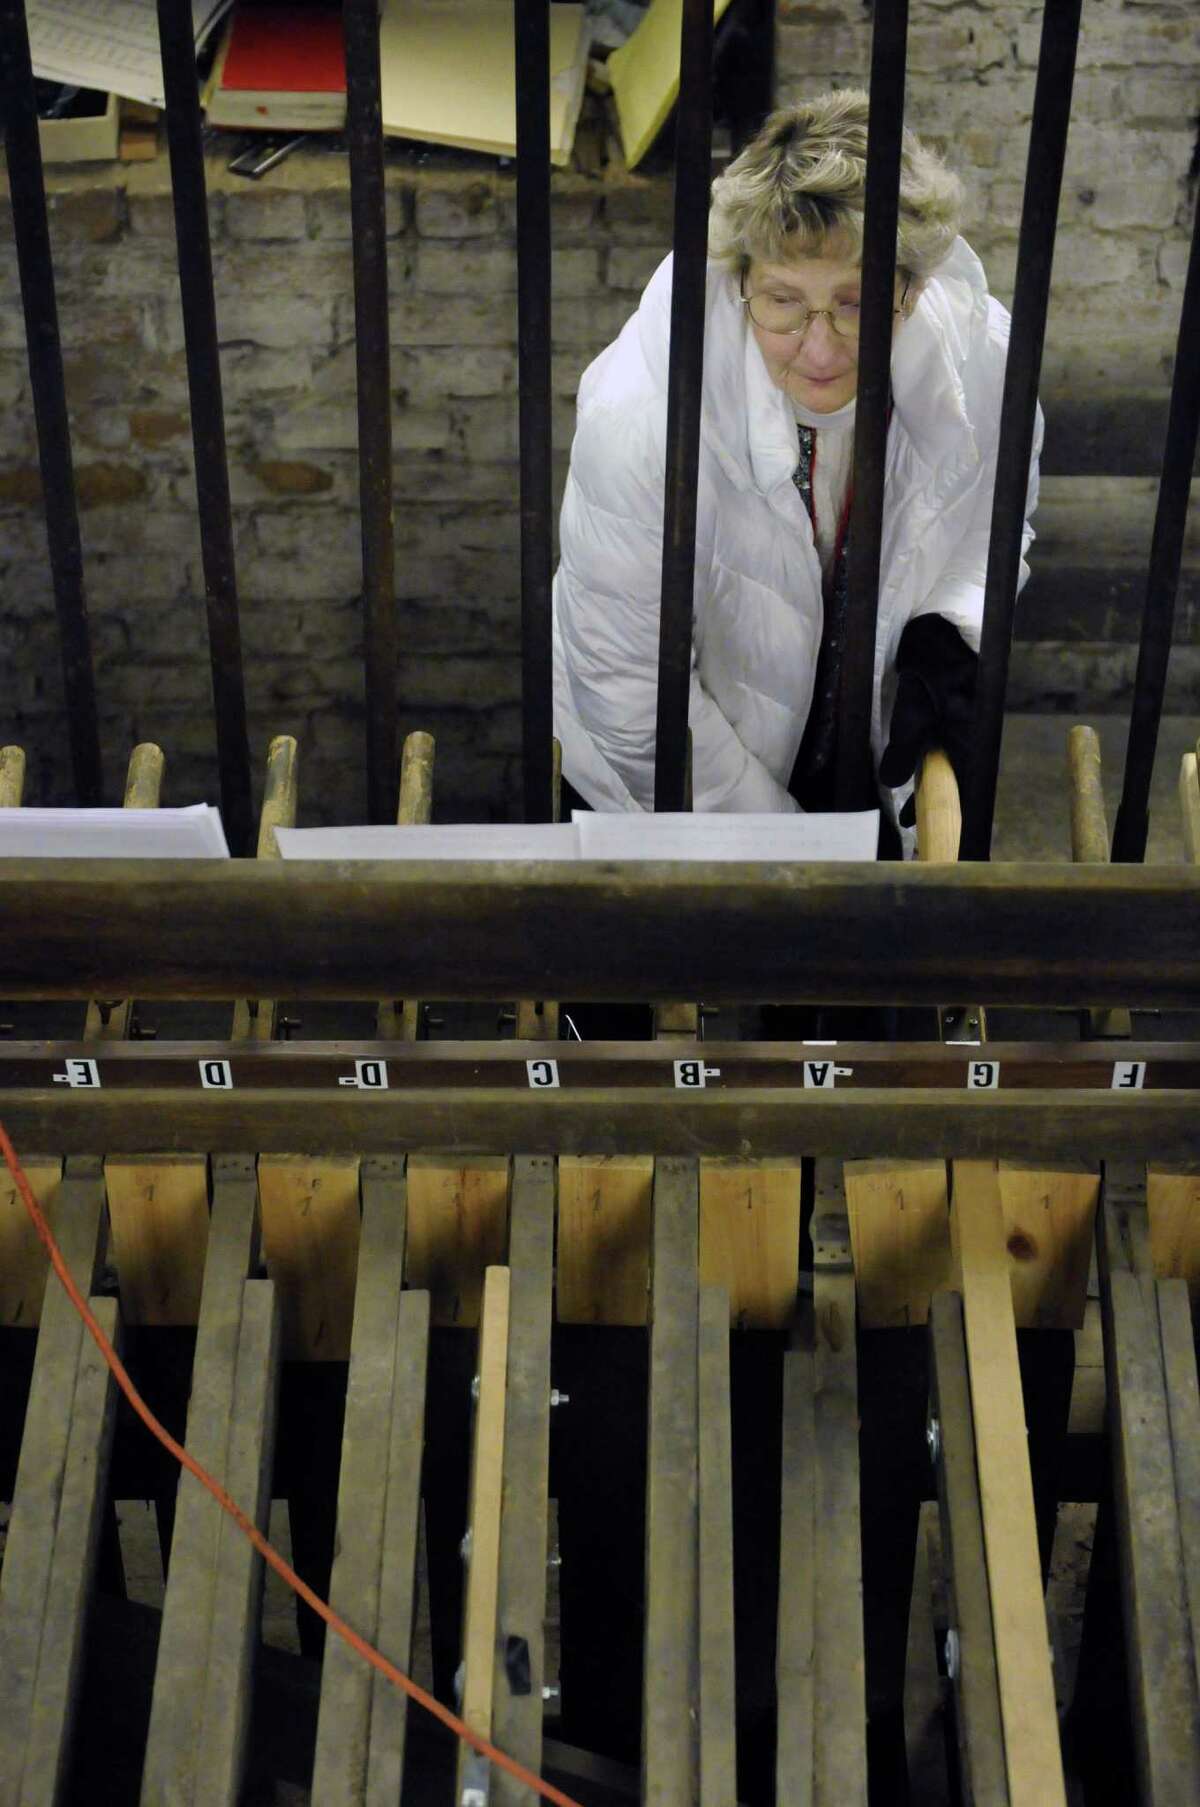 Gayle Walrath plays the restored 19th-century Meneely bells at the Cathedral of the Immaculate Conception in Albany, NY Saturday Dec. 8, 2012. (Michael P. Farrell/Times Union)